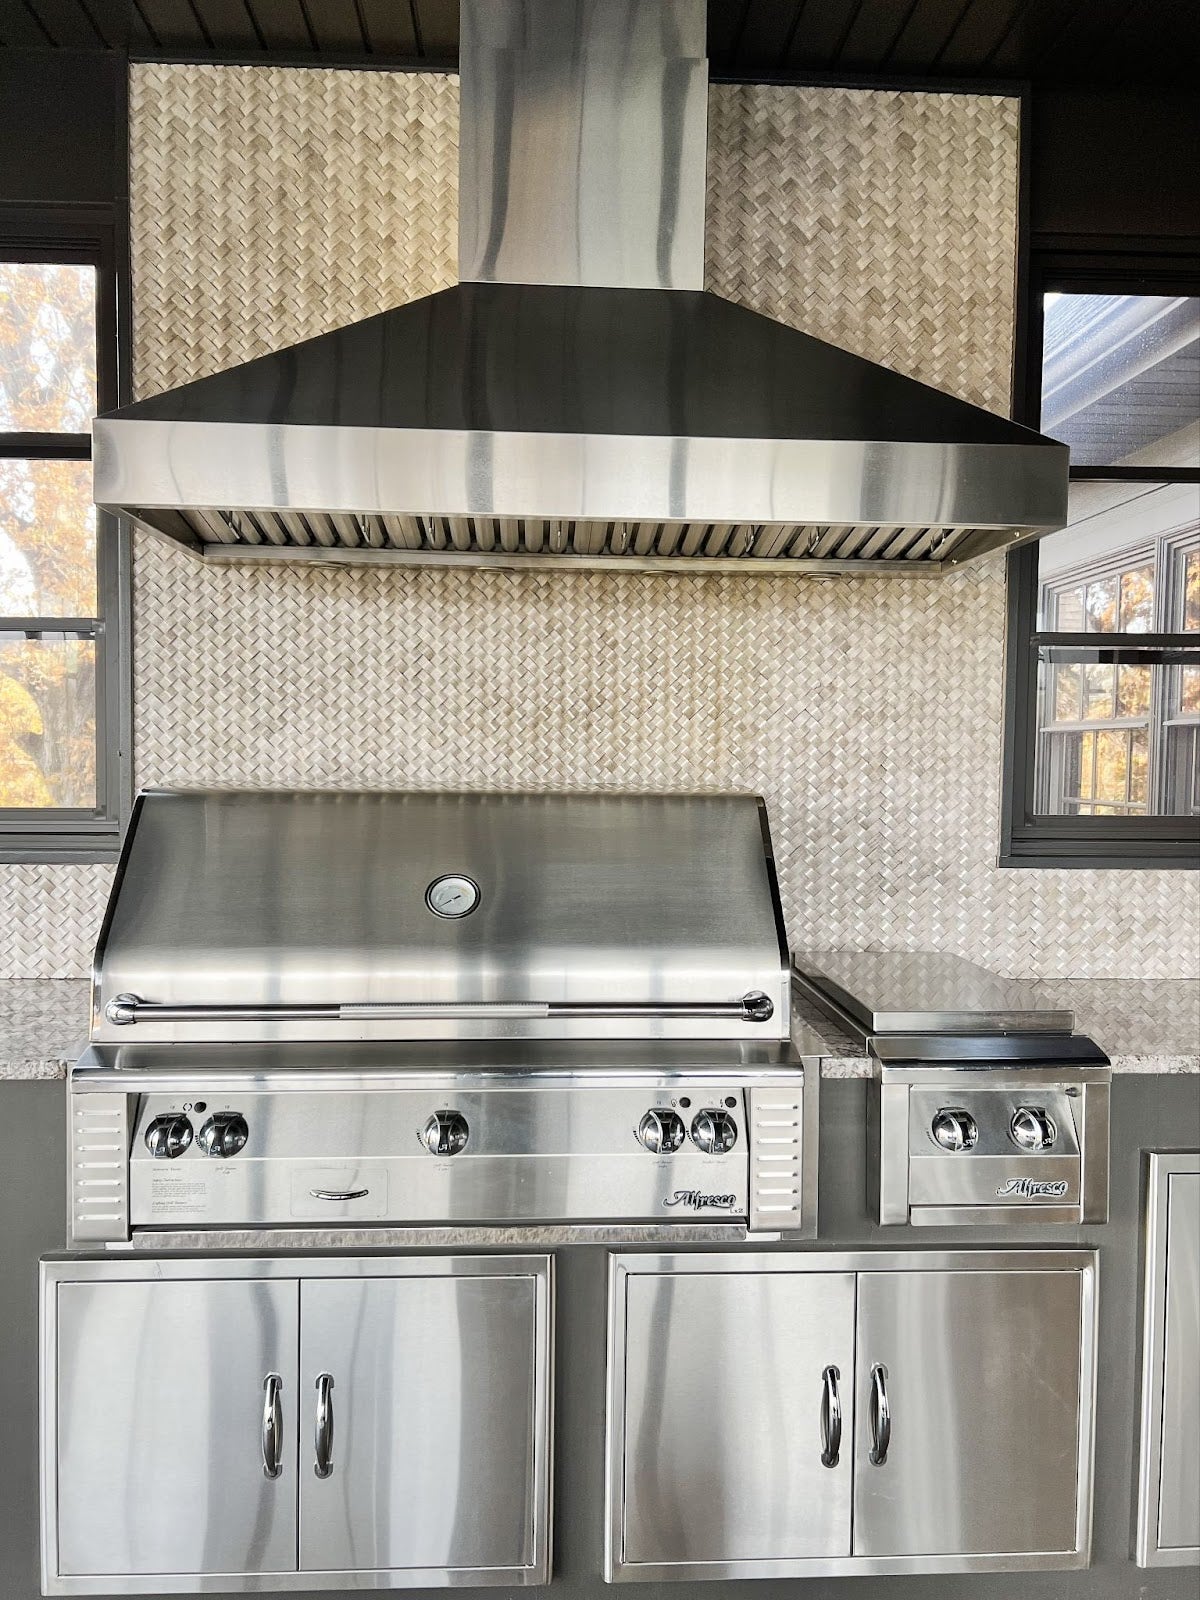 Sophisticated outdoor grilling setup featuring a Proline range hood, premium stainless steel grill, and cabinets with textured backdrop - prolinerangehoods.com.